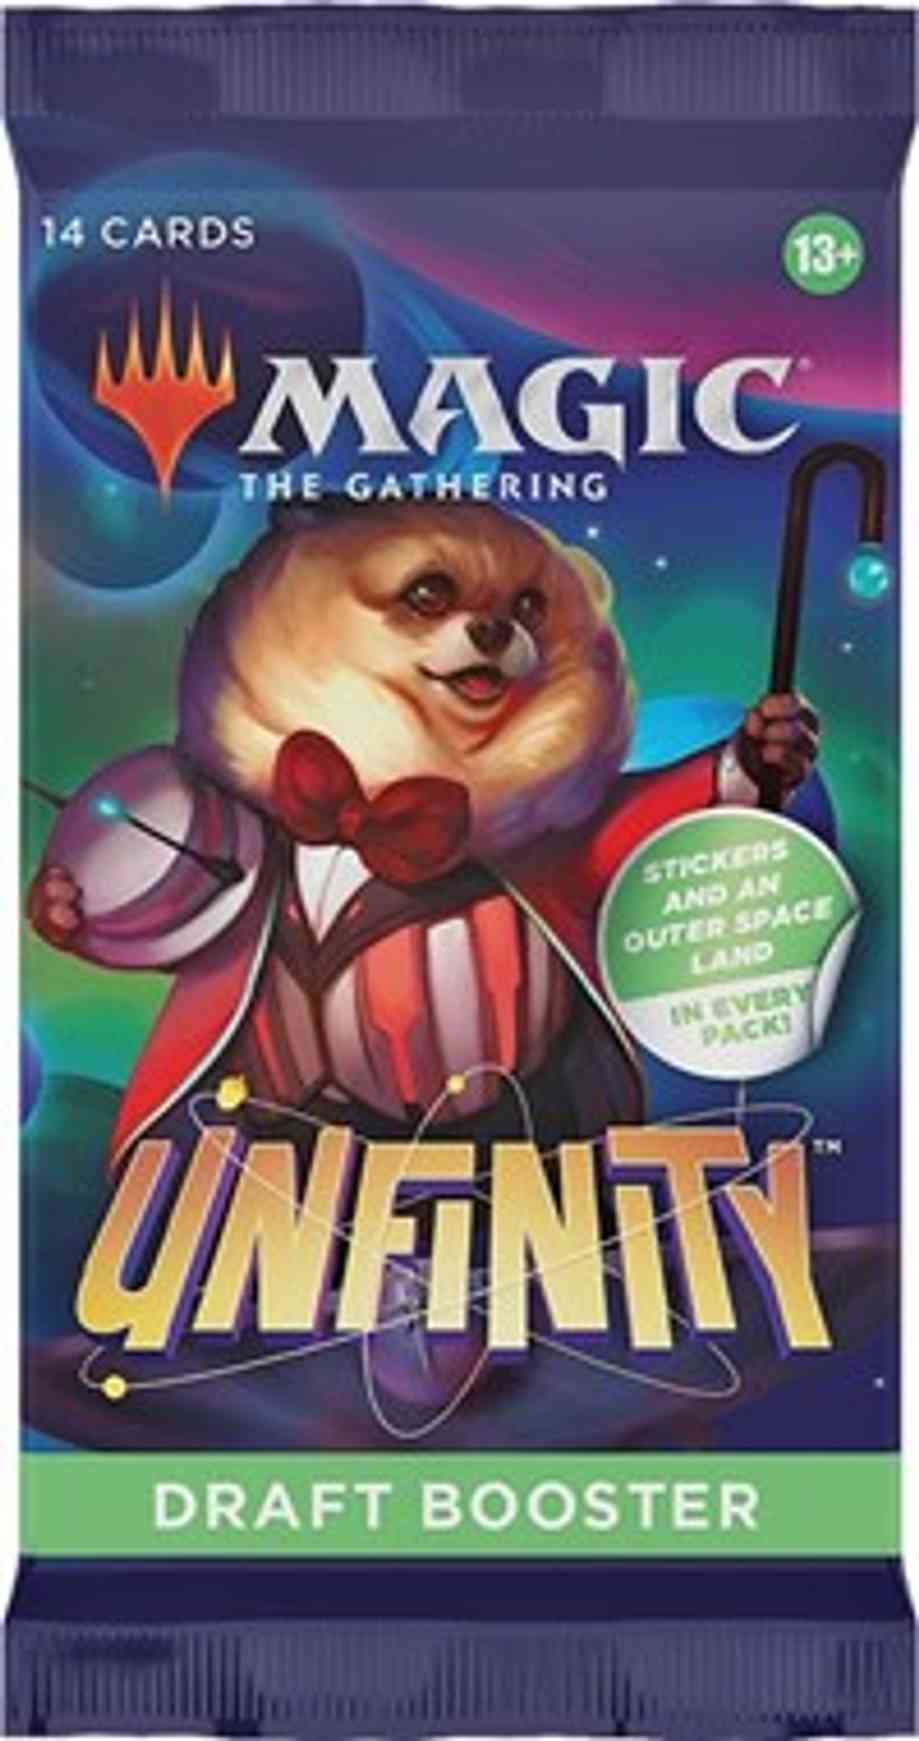 Unfinity - Draft Booster Pack magic card front